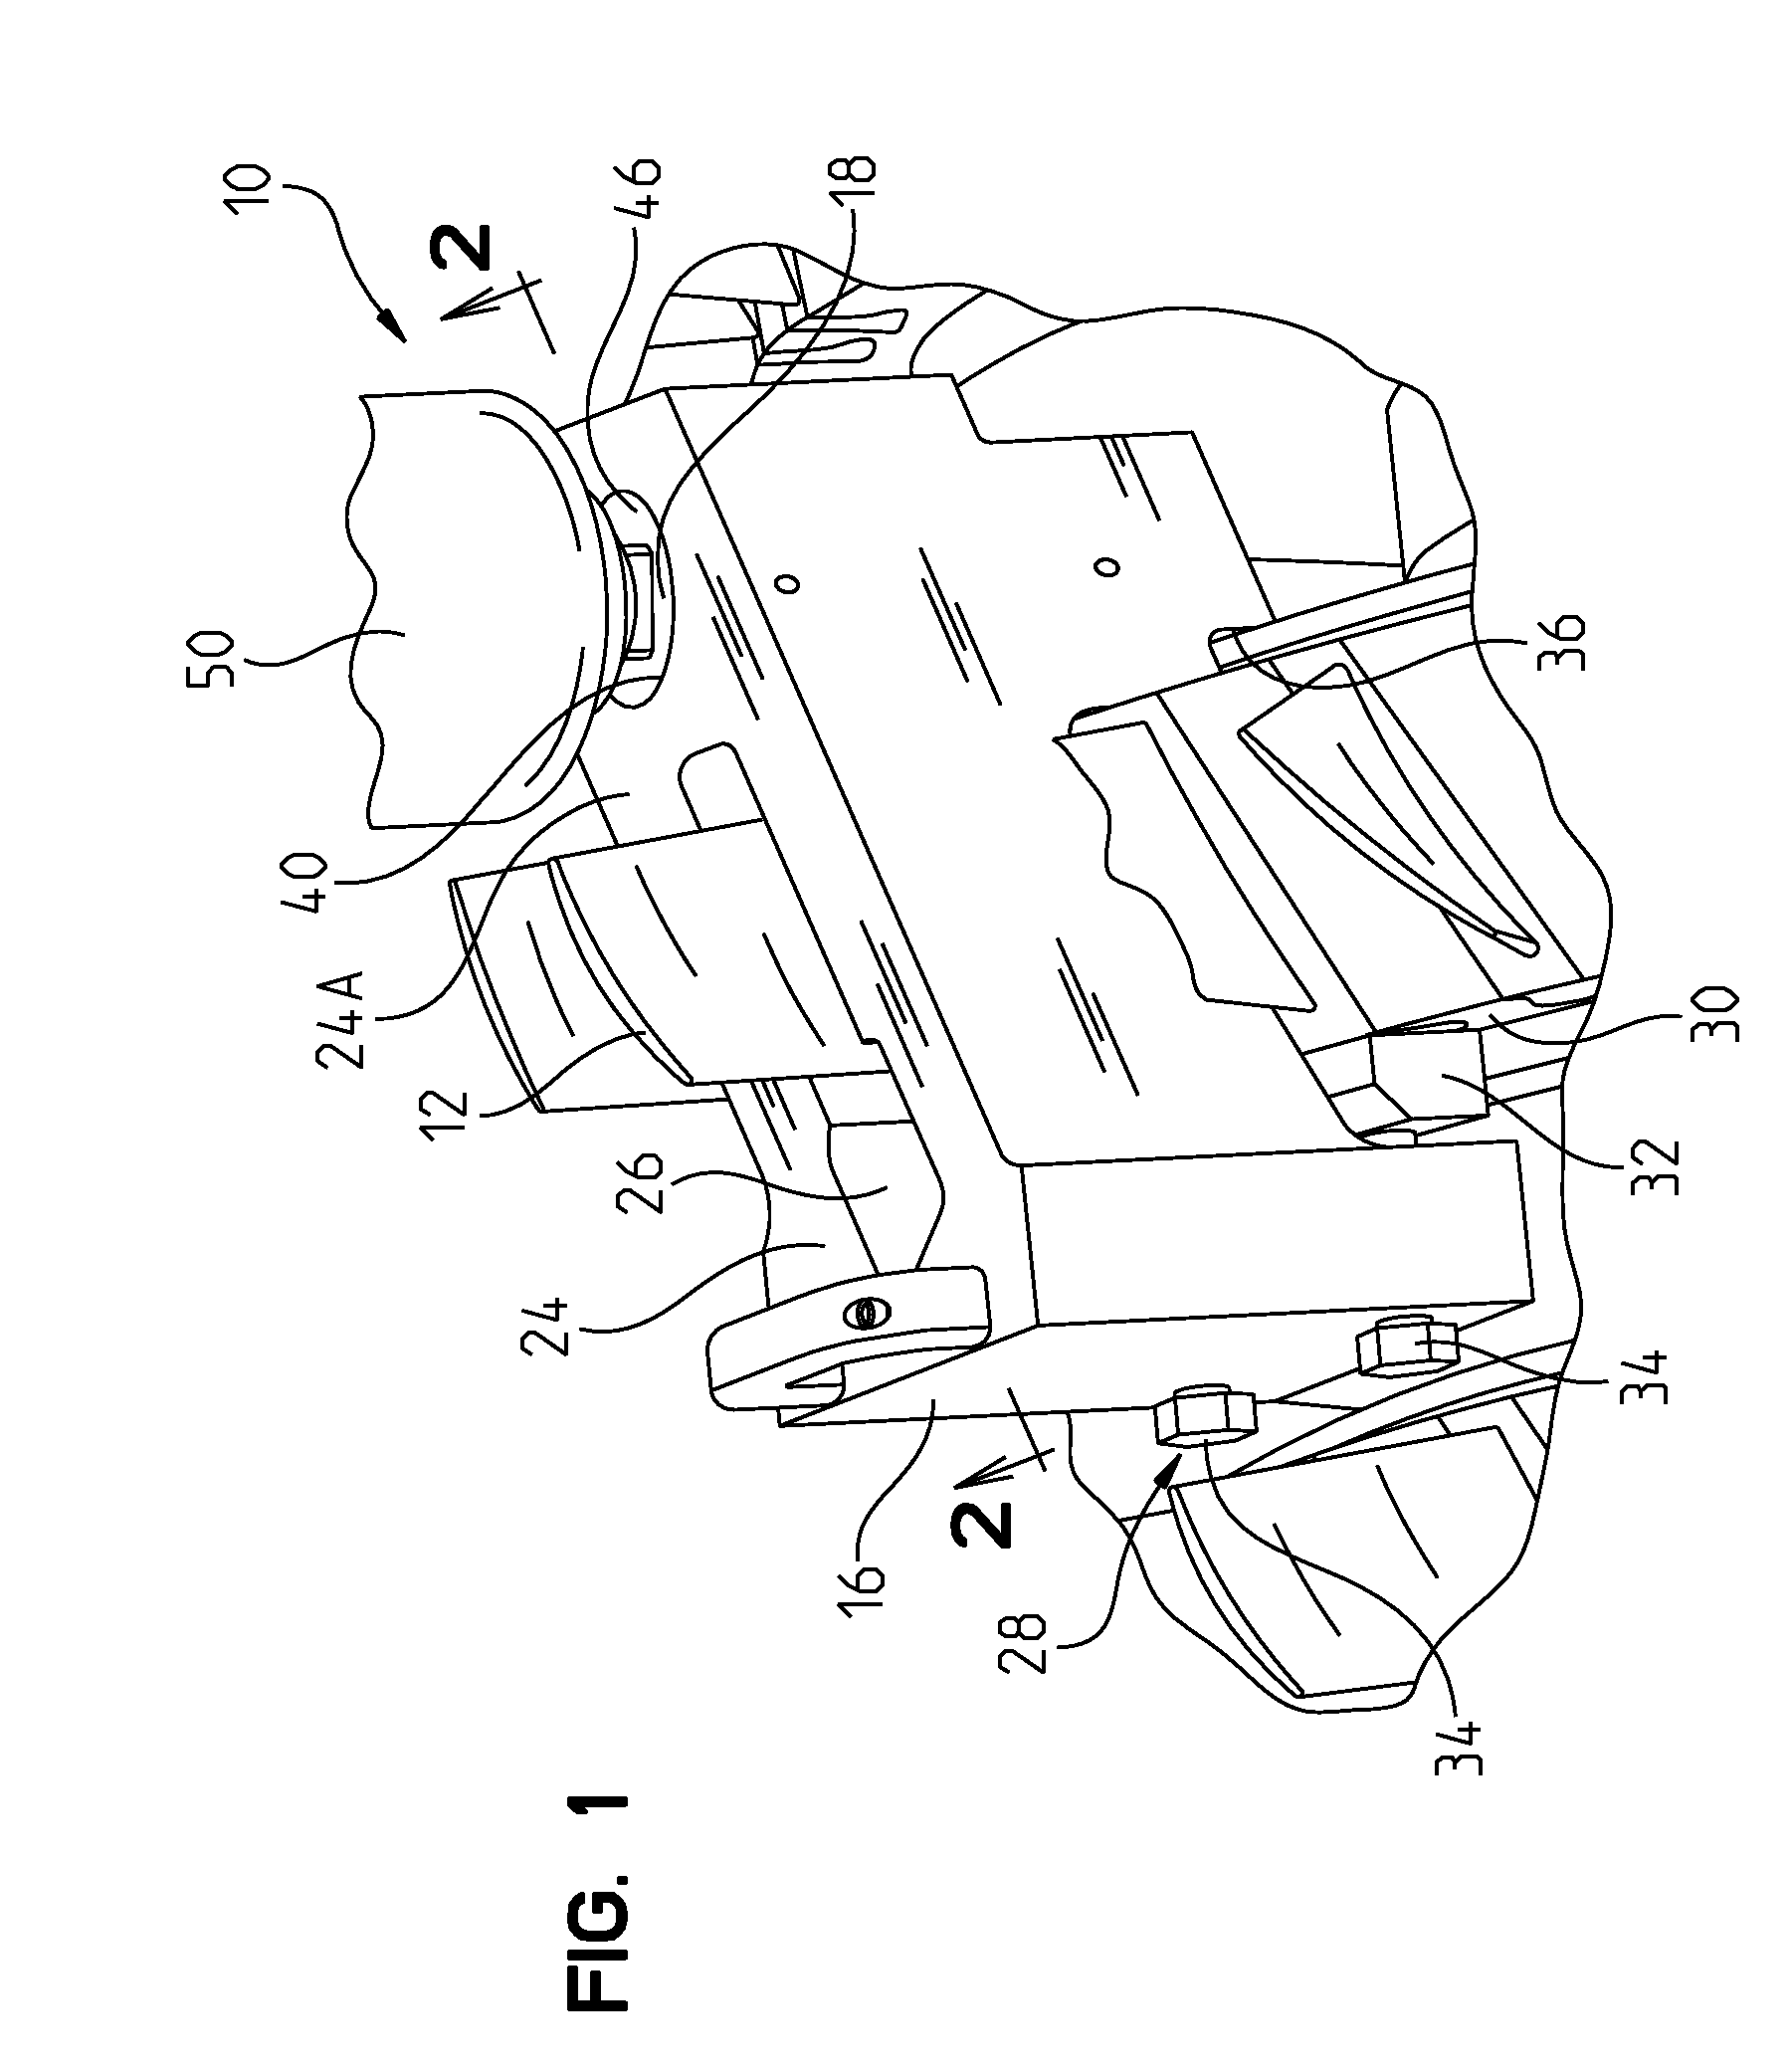 Removal of stuck blade in a turbine engine